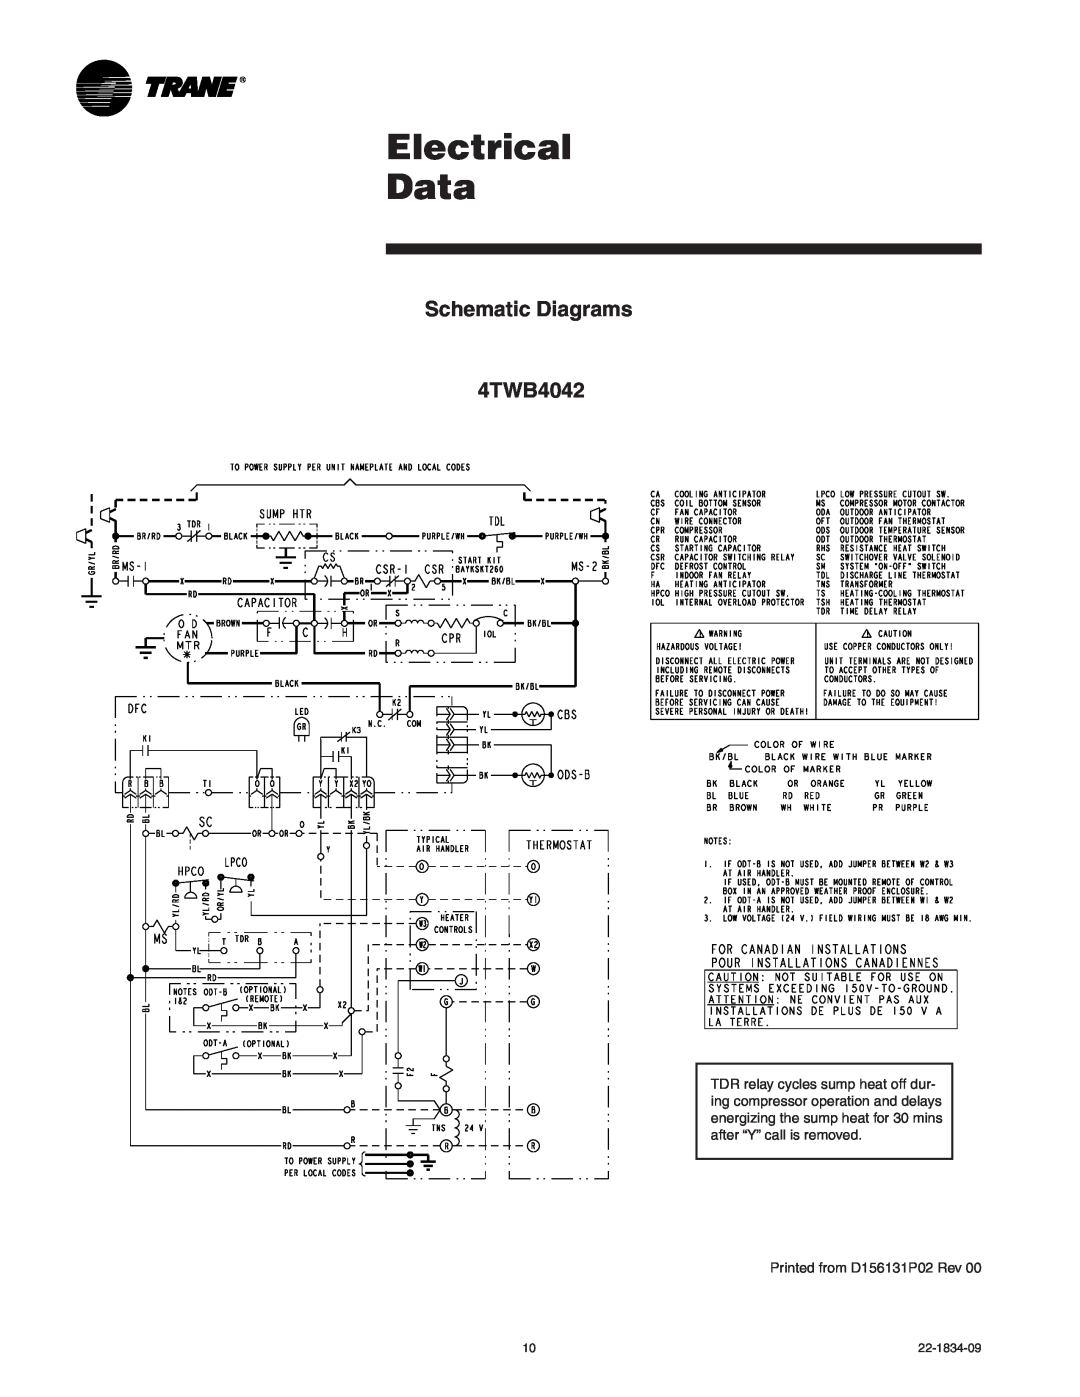 Trane manual Electrical Data, Schematic Diagrams 4TWB4042, Printed from D156131P02 Rev 